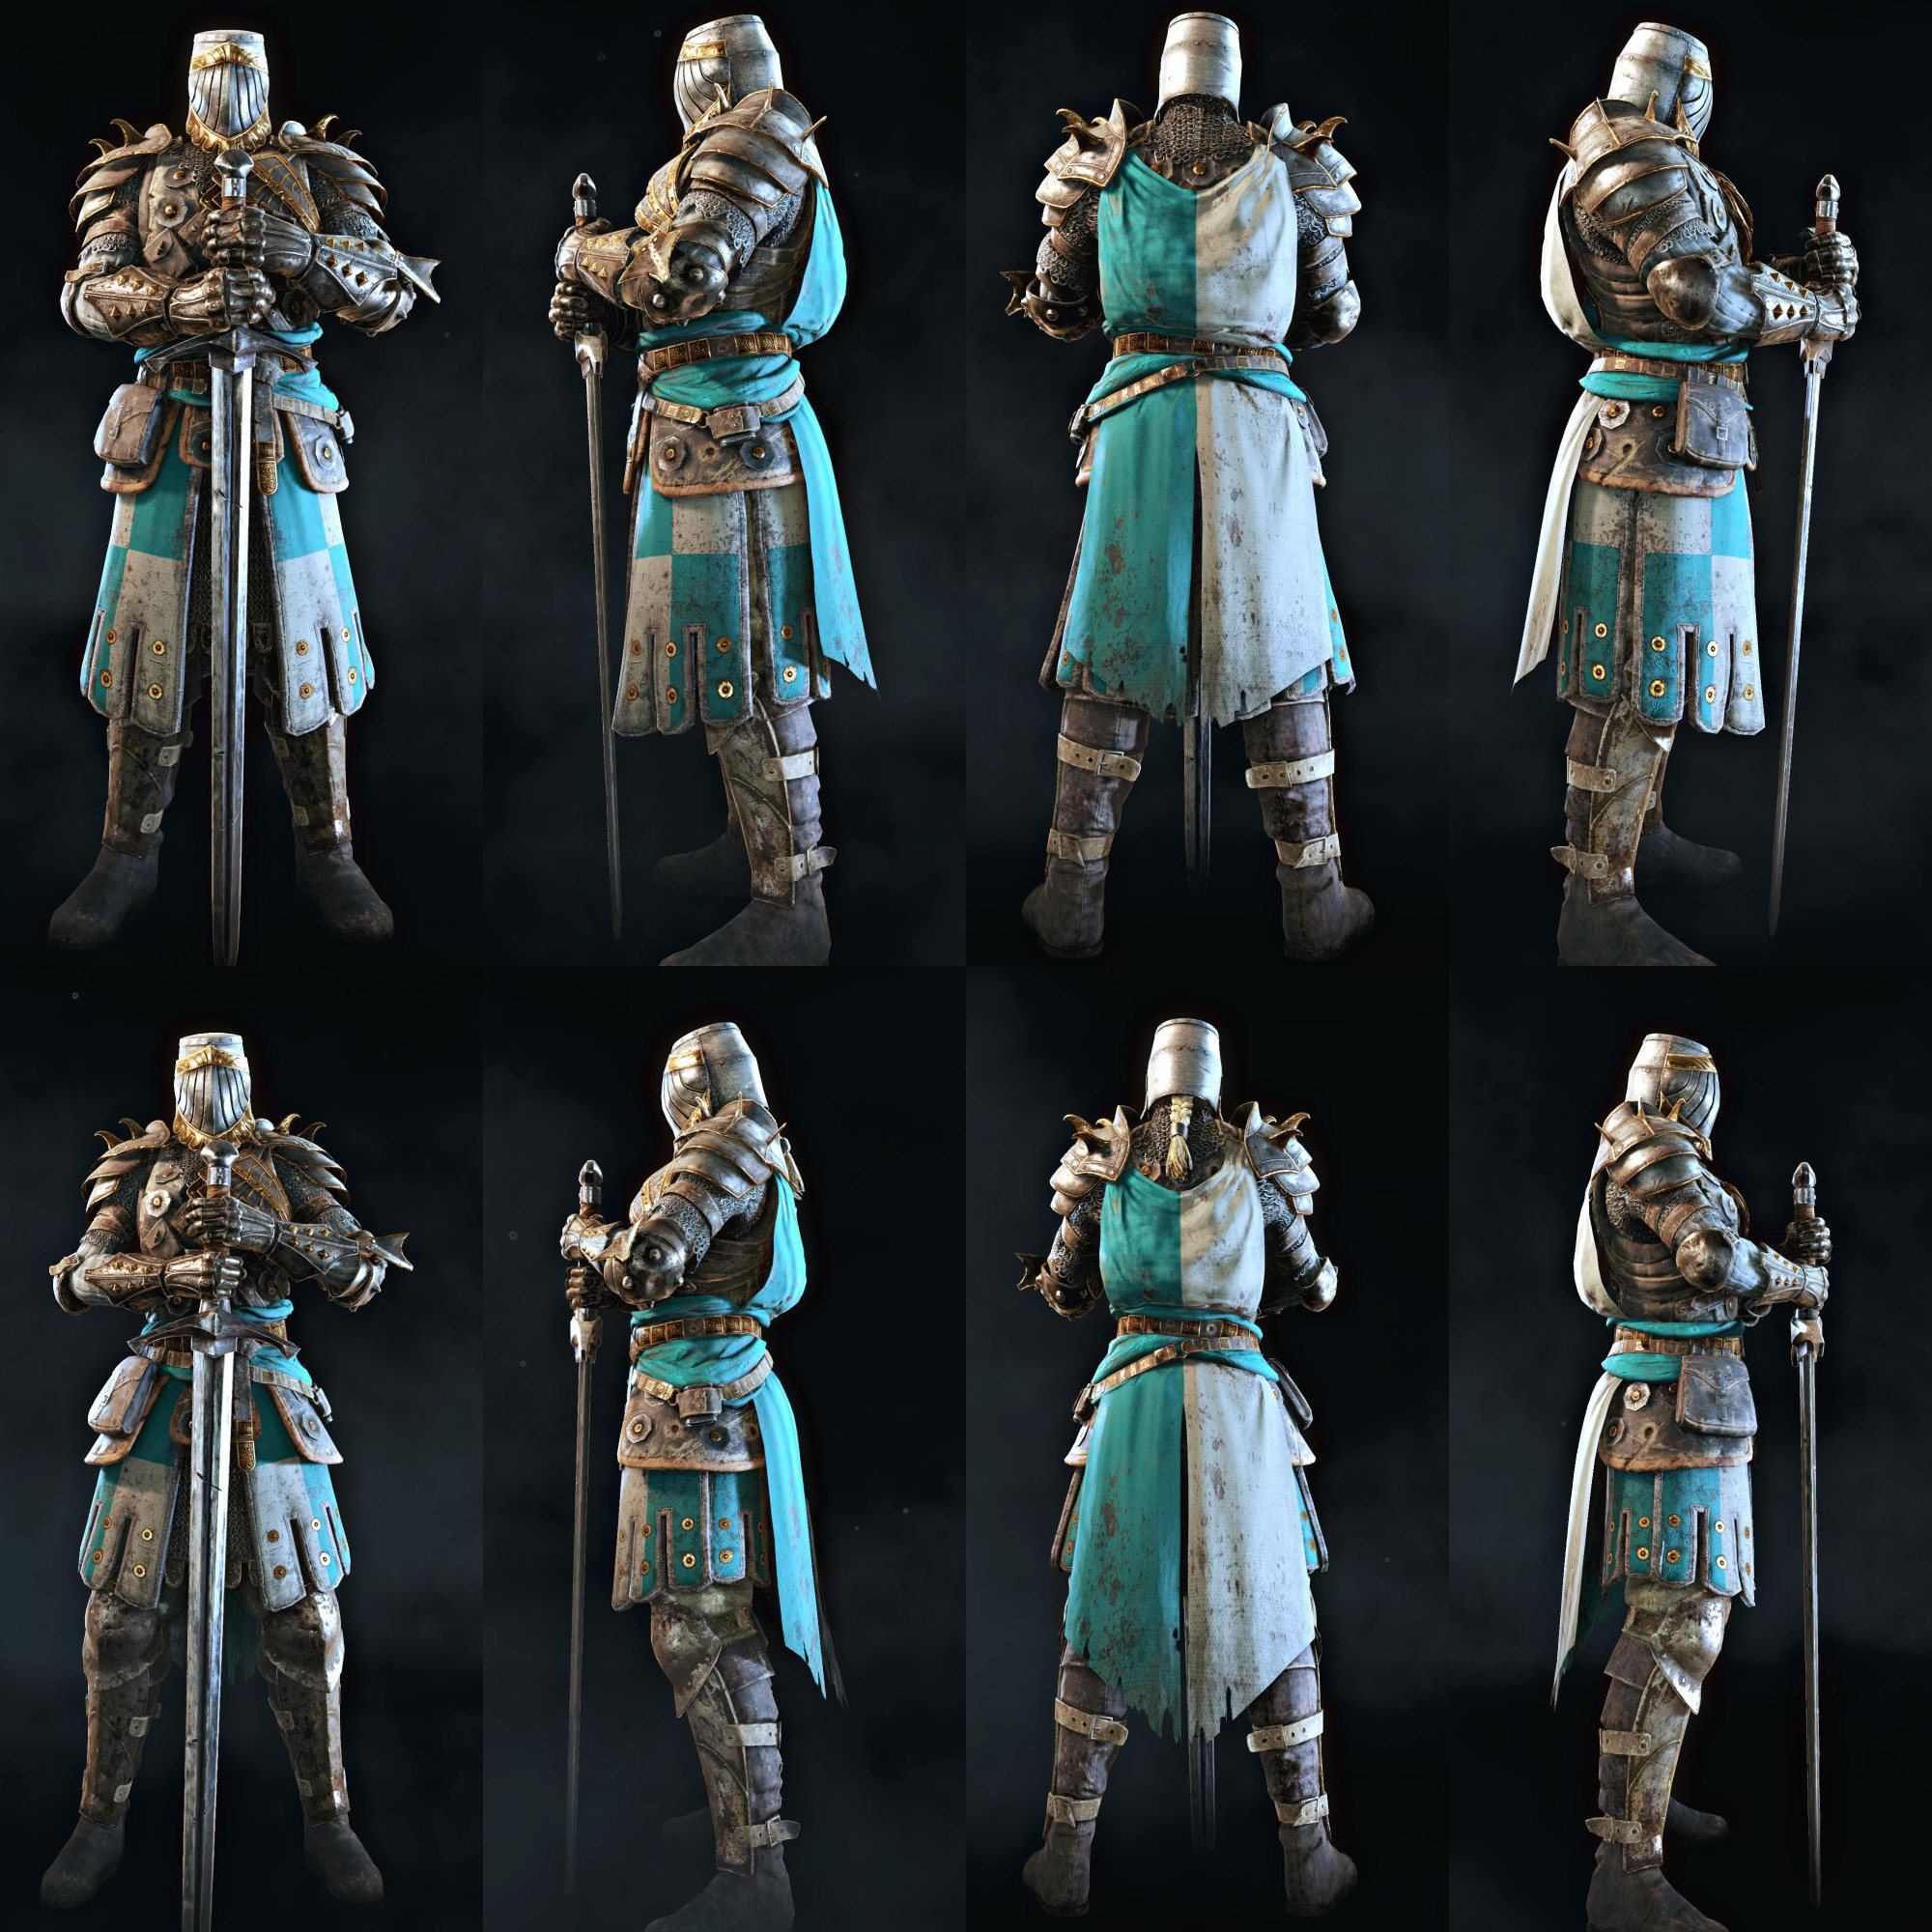 17 For Honor Fashion Tier List Tier List Update All in one Photos.